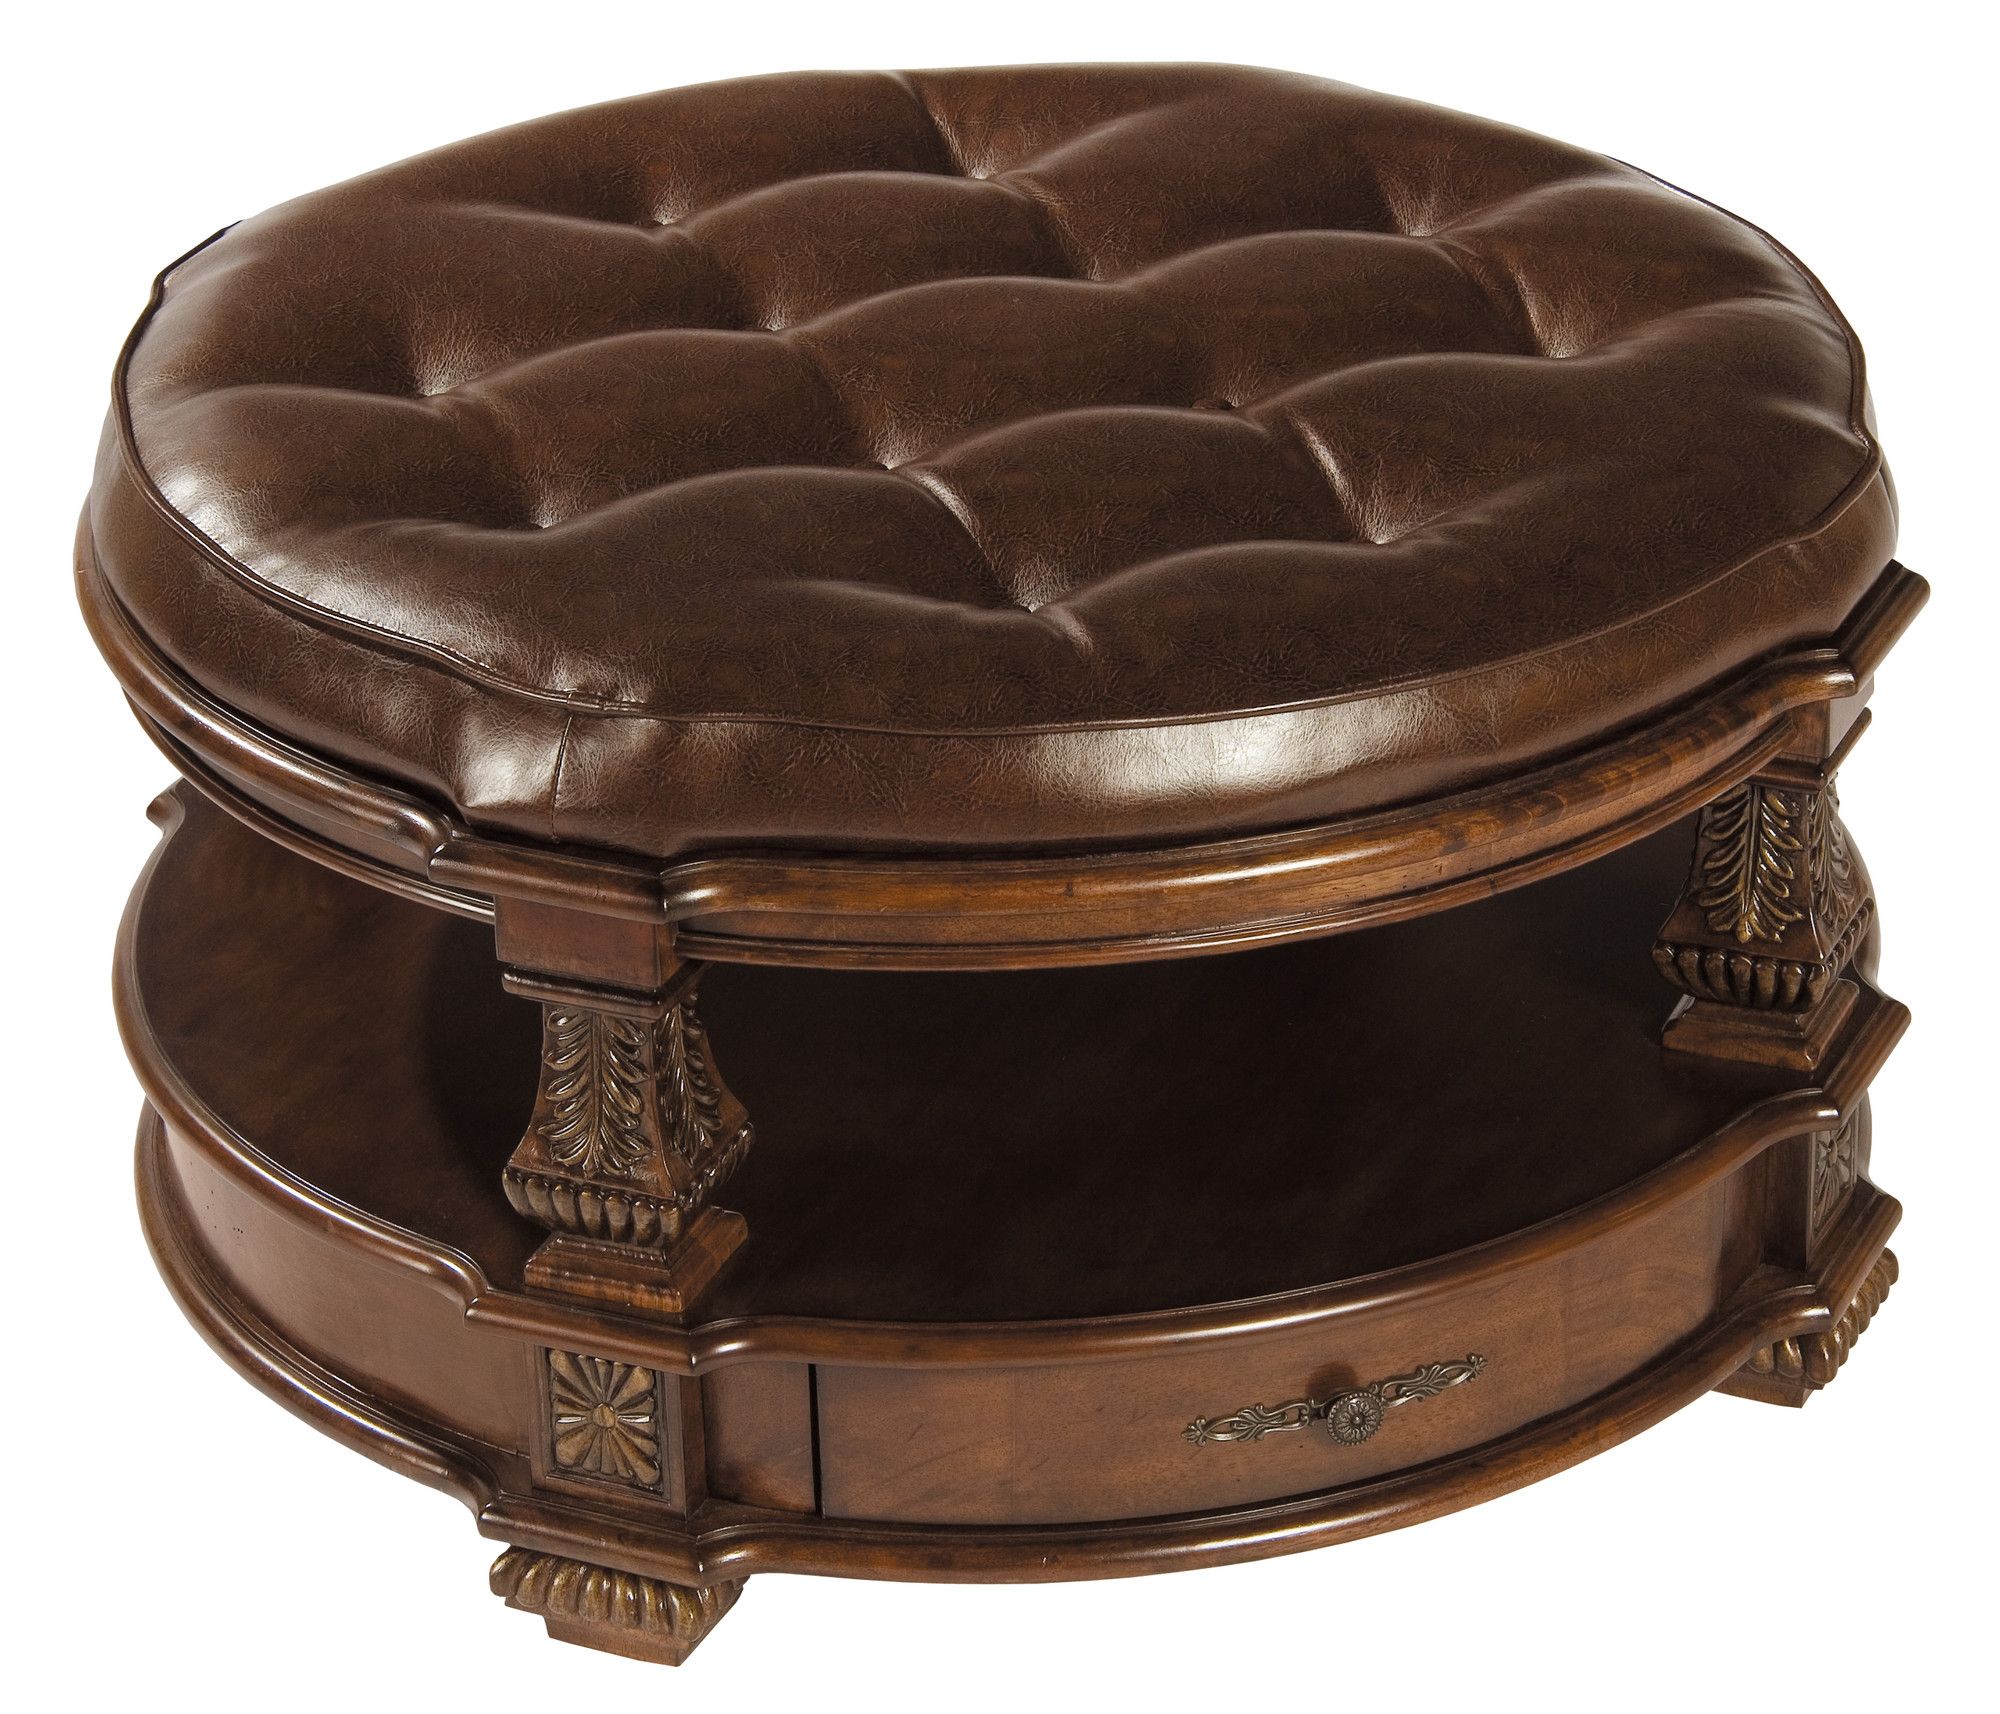 This Circular Castered Ottoman From Stein World Features Detailed Carved Wood Frame With Drawer Storage Round Leather Ottomans Coffee Tables (View 10 of 10)